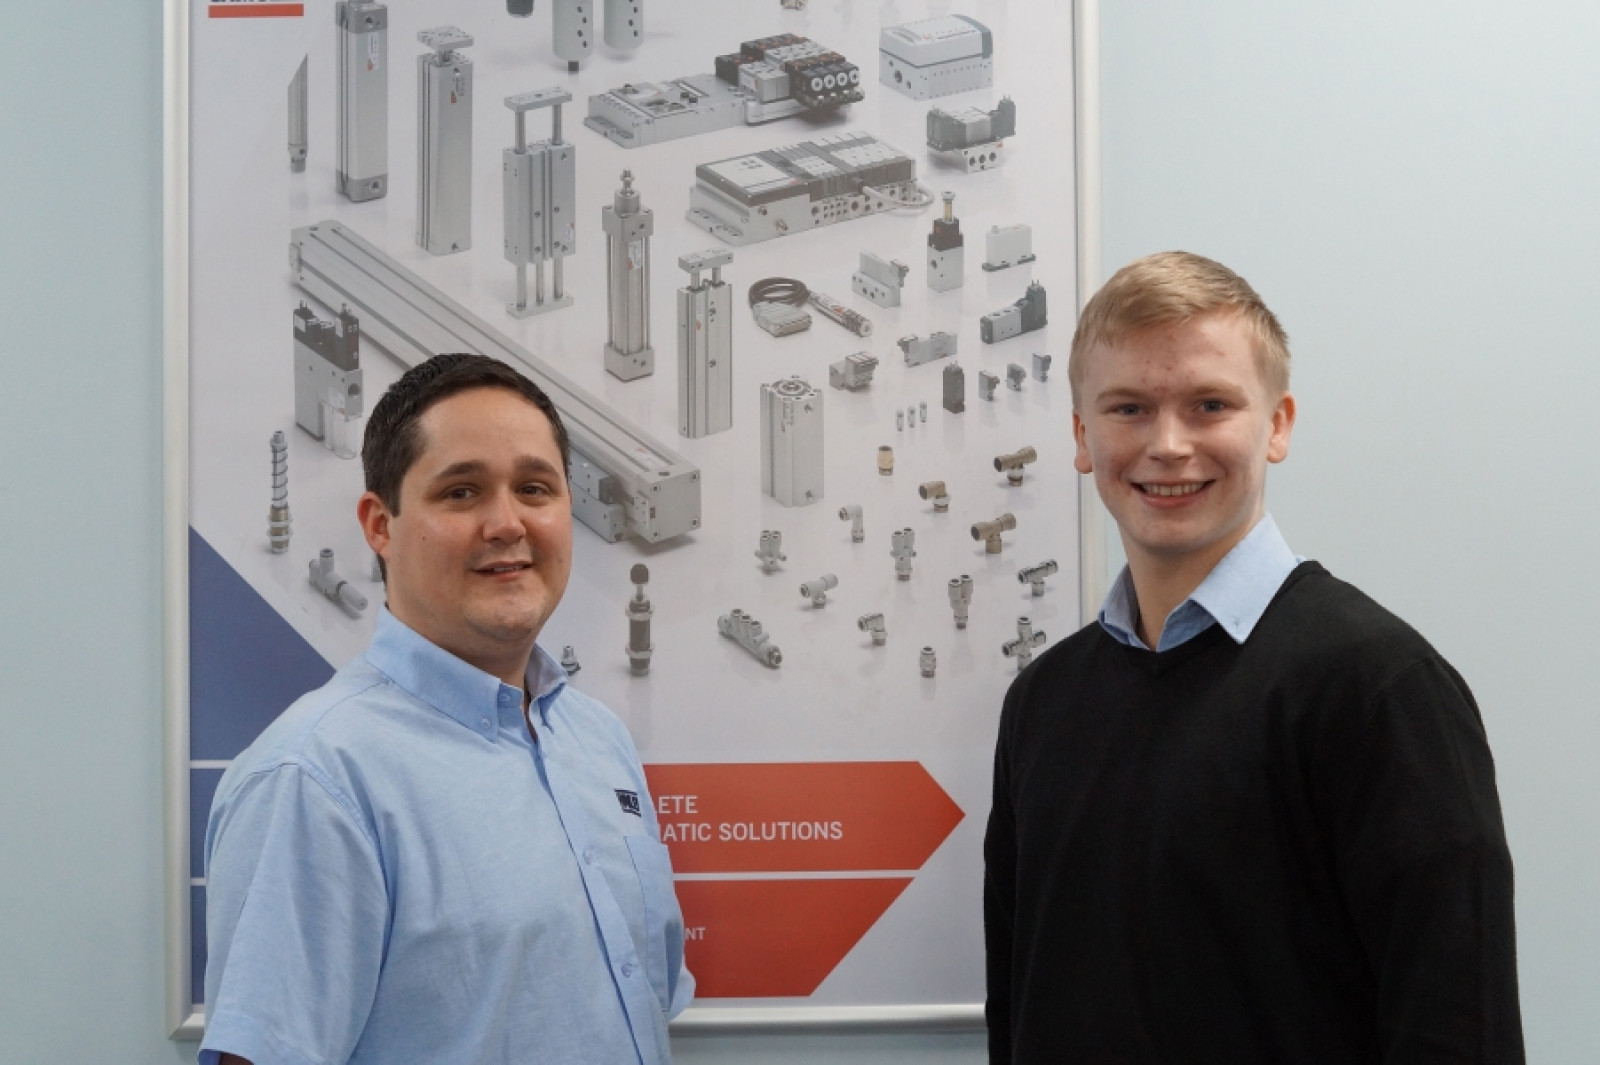 Hayley Group turns up pressure in fluid power sector with new recruits